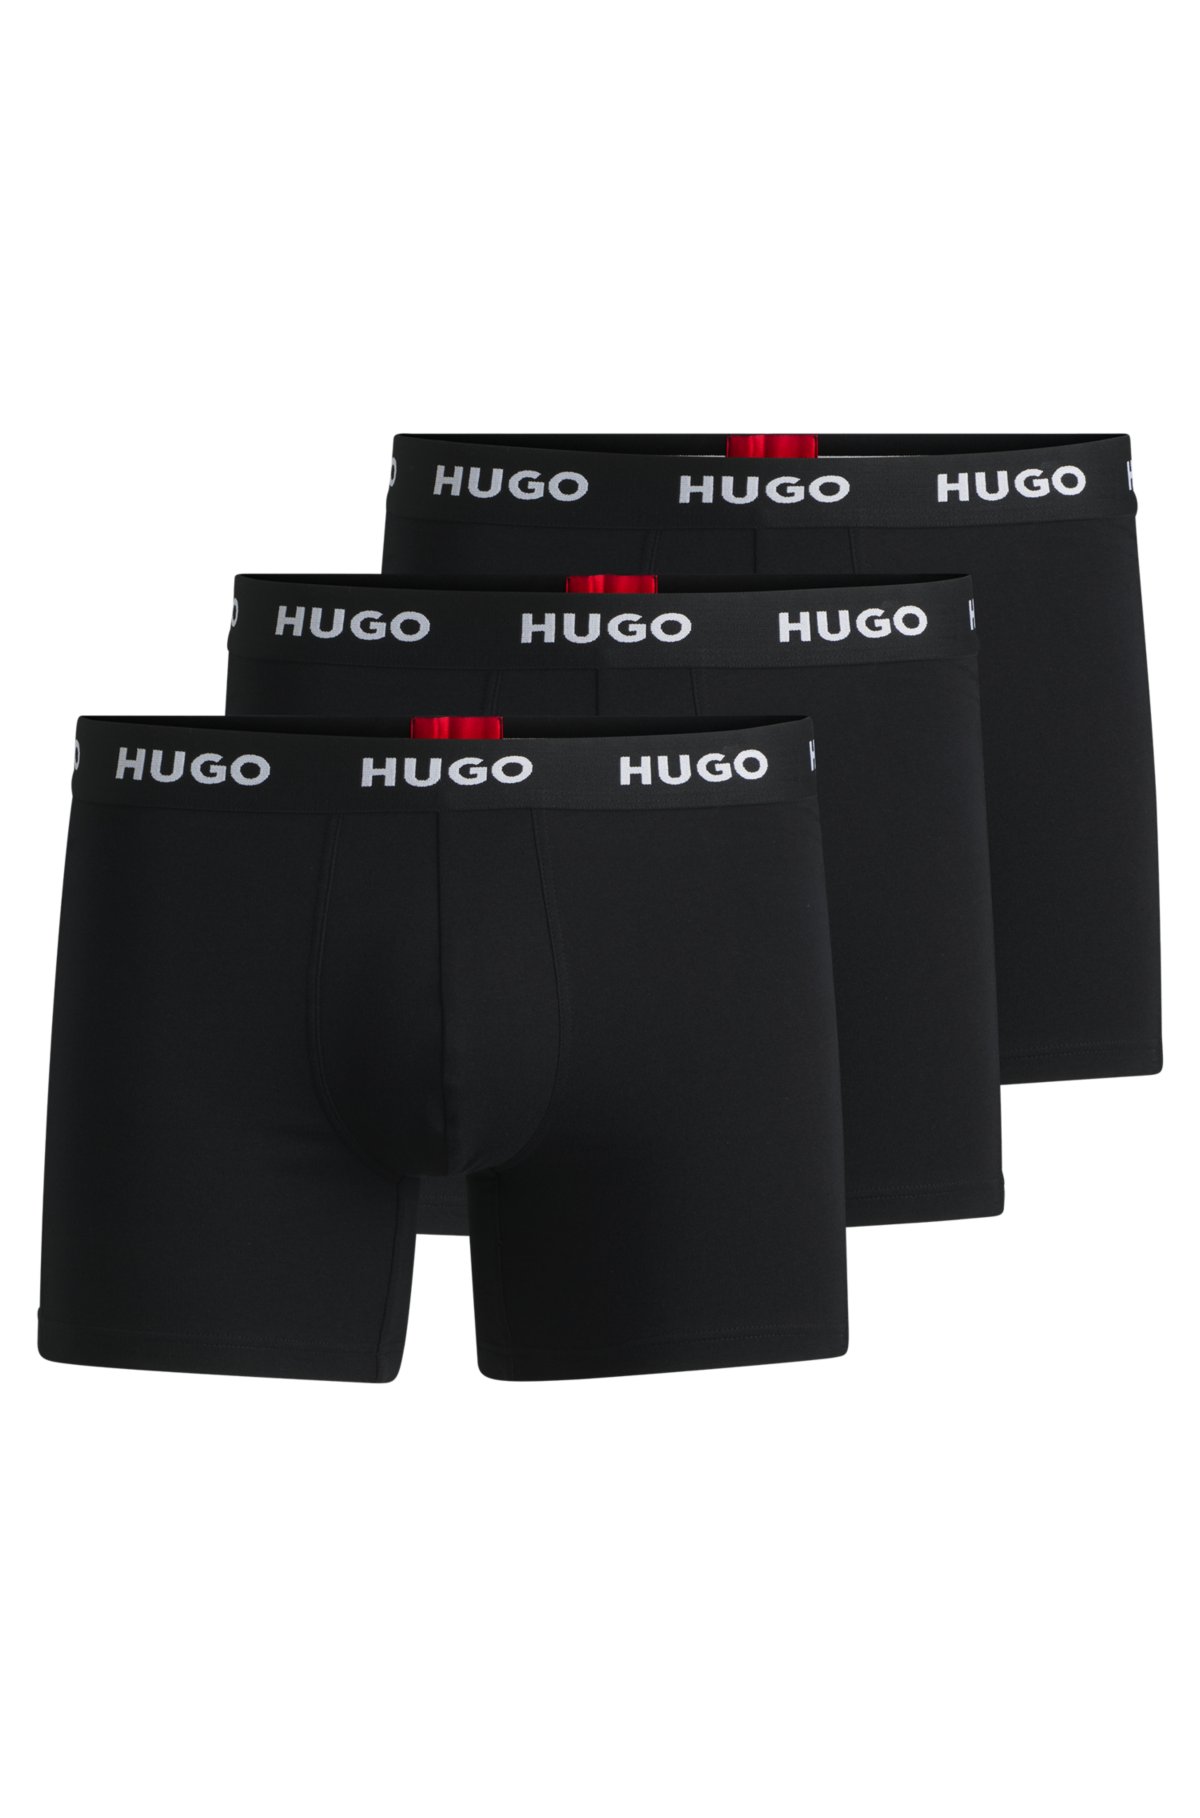 Stretch cotton boxer shorts with elastic waistband with logo in a three pack